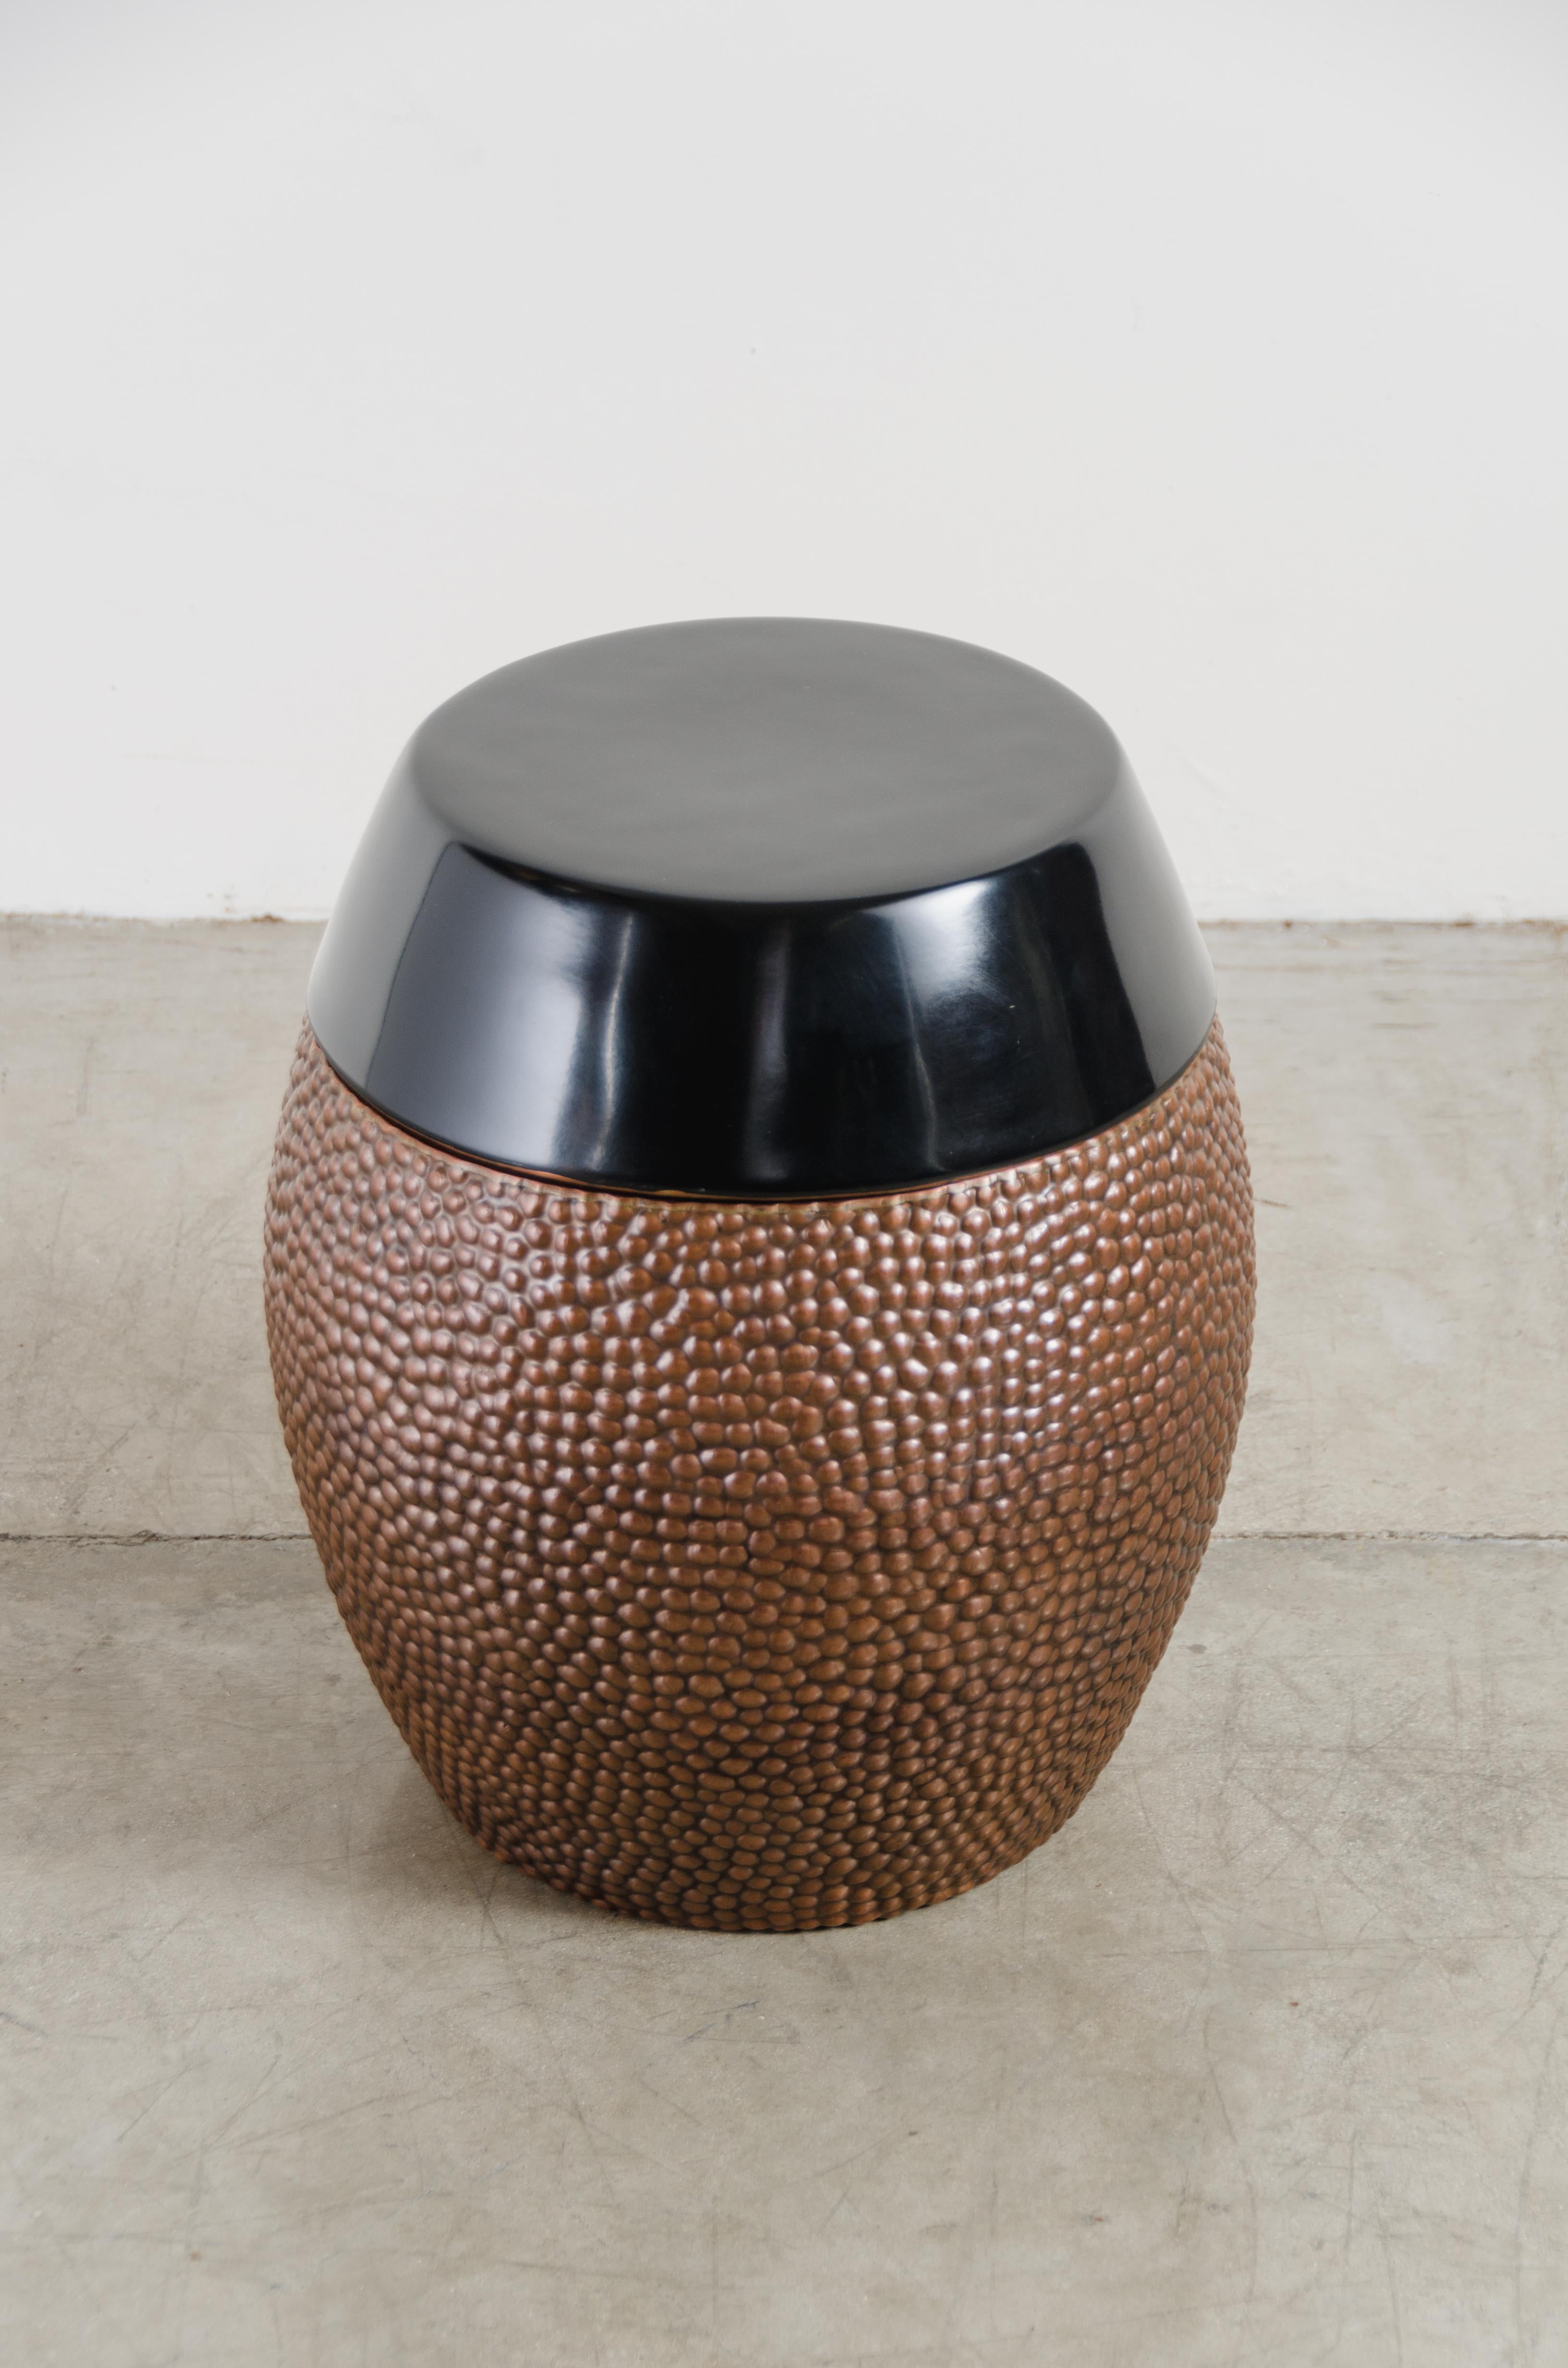 Repoussé Toad Skin Barrel Storage Drum Stool, Copper and Black Lacquer by Robert Kuo For Sale